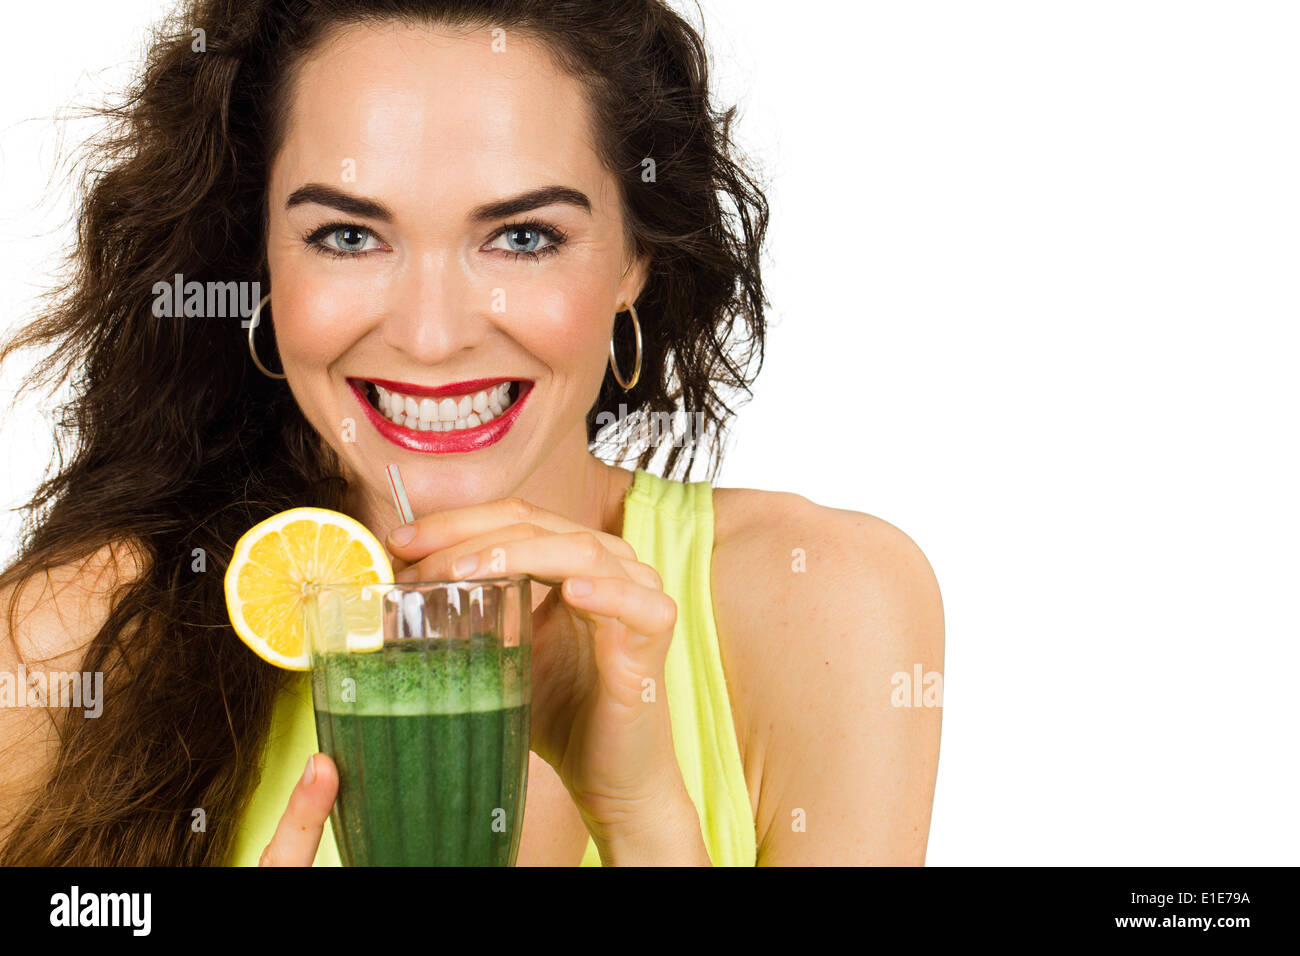 Beautiful healthy smiling woman holding and about to drink an organic green smoothie. Isolated on white. Stock Photo